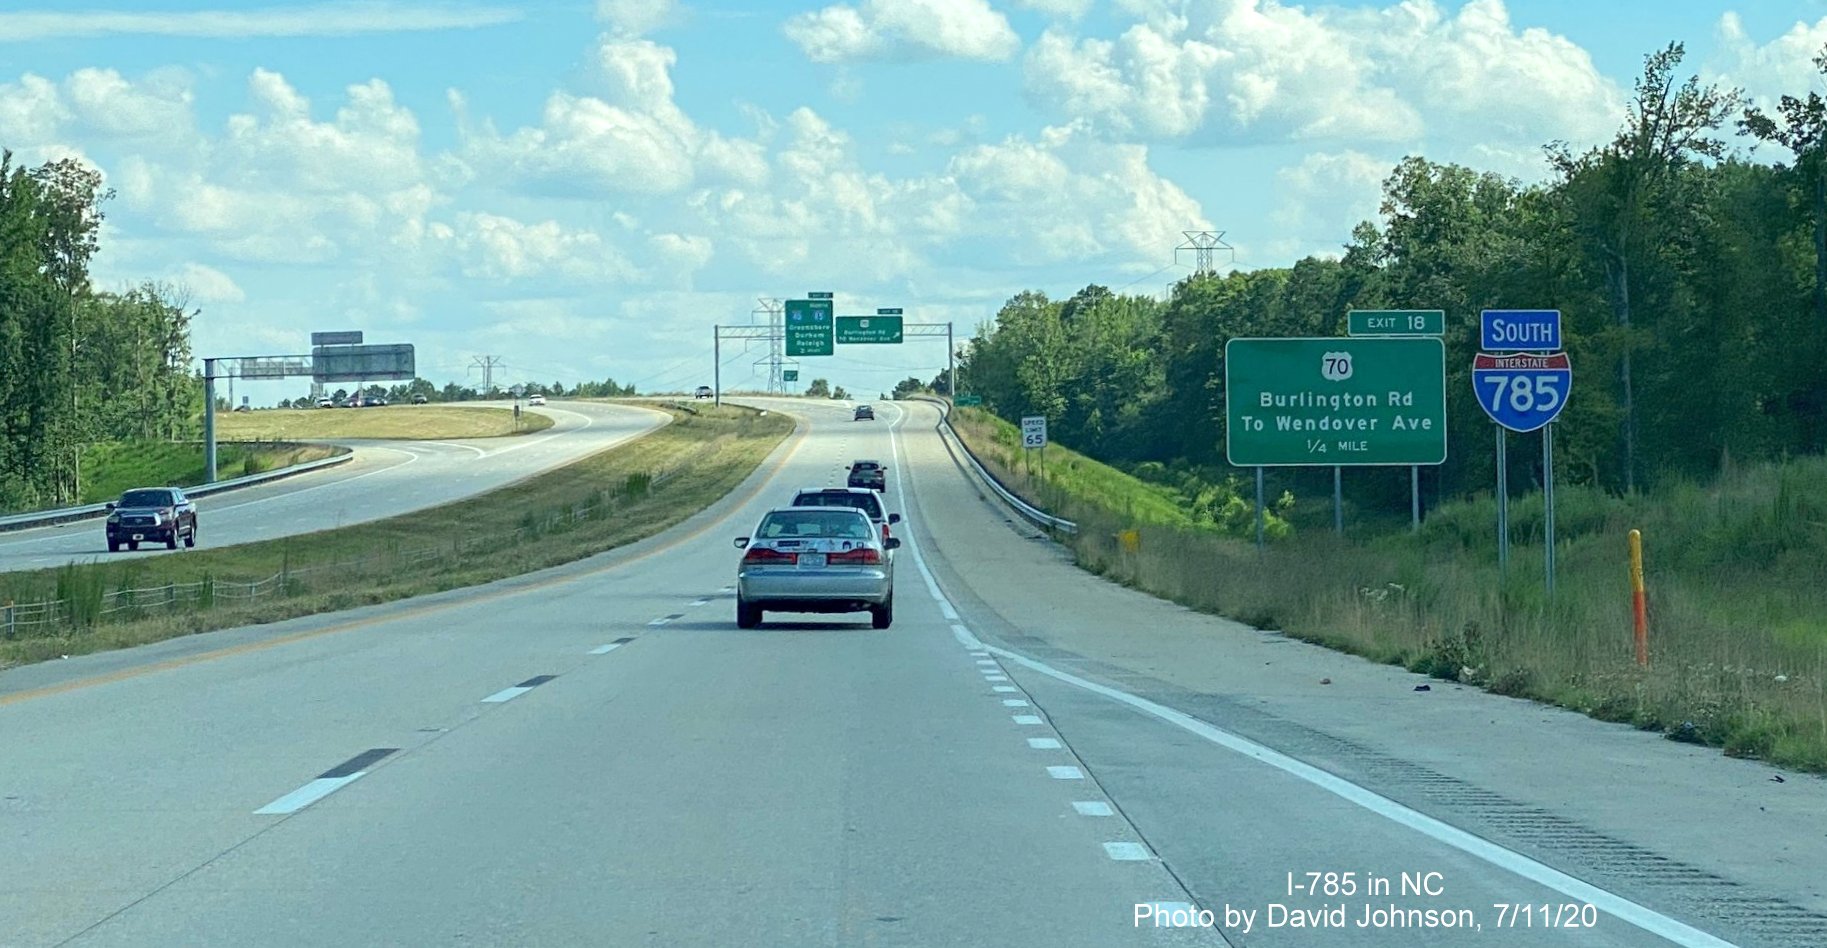 Image of South I-785 reassurance marker prior to 1/4 mile advance sign for US 70 exit on Greensboro Urban Loop, by David Johnson July 2020